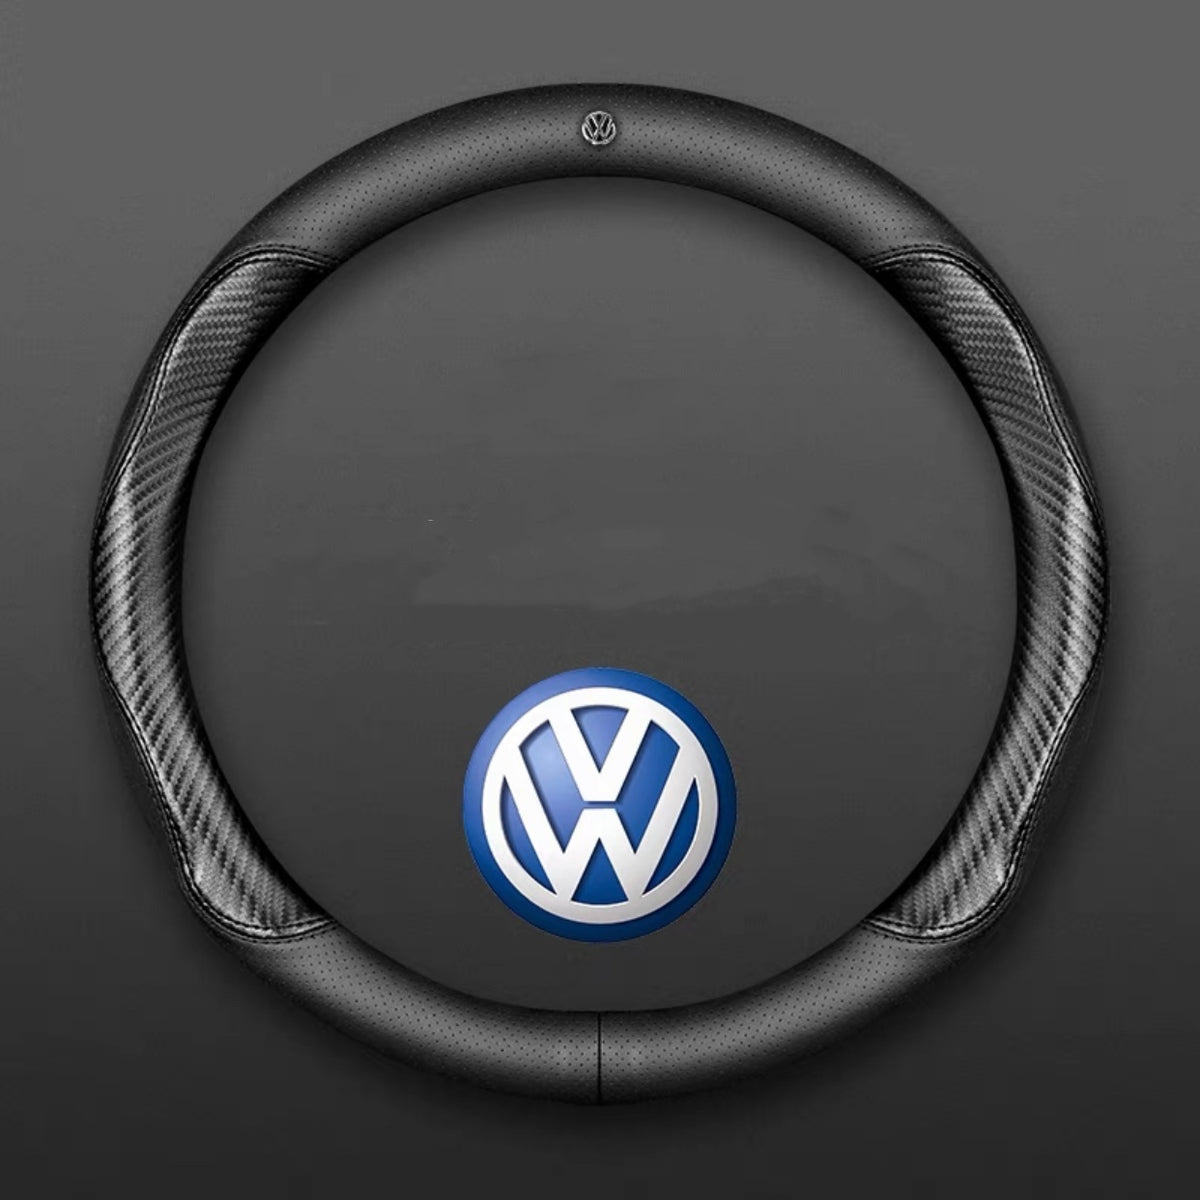 Carbon Fiber and Leather Steering wheel cover for VW Volkswagen – Carsoda